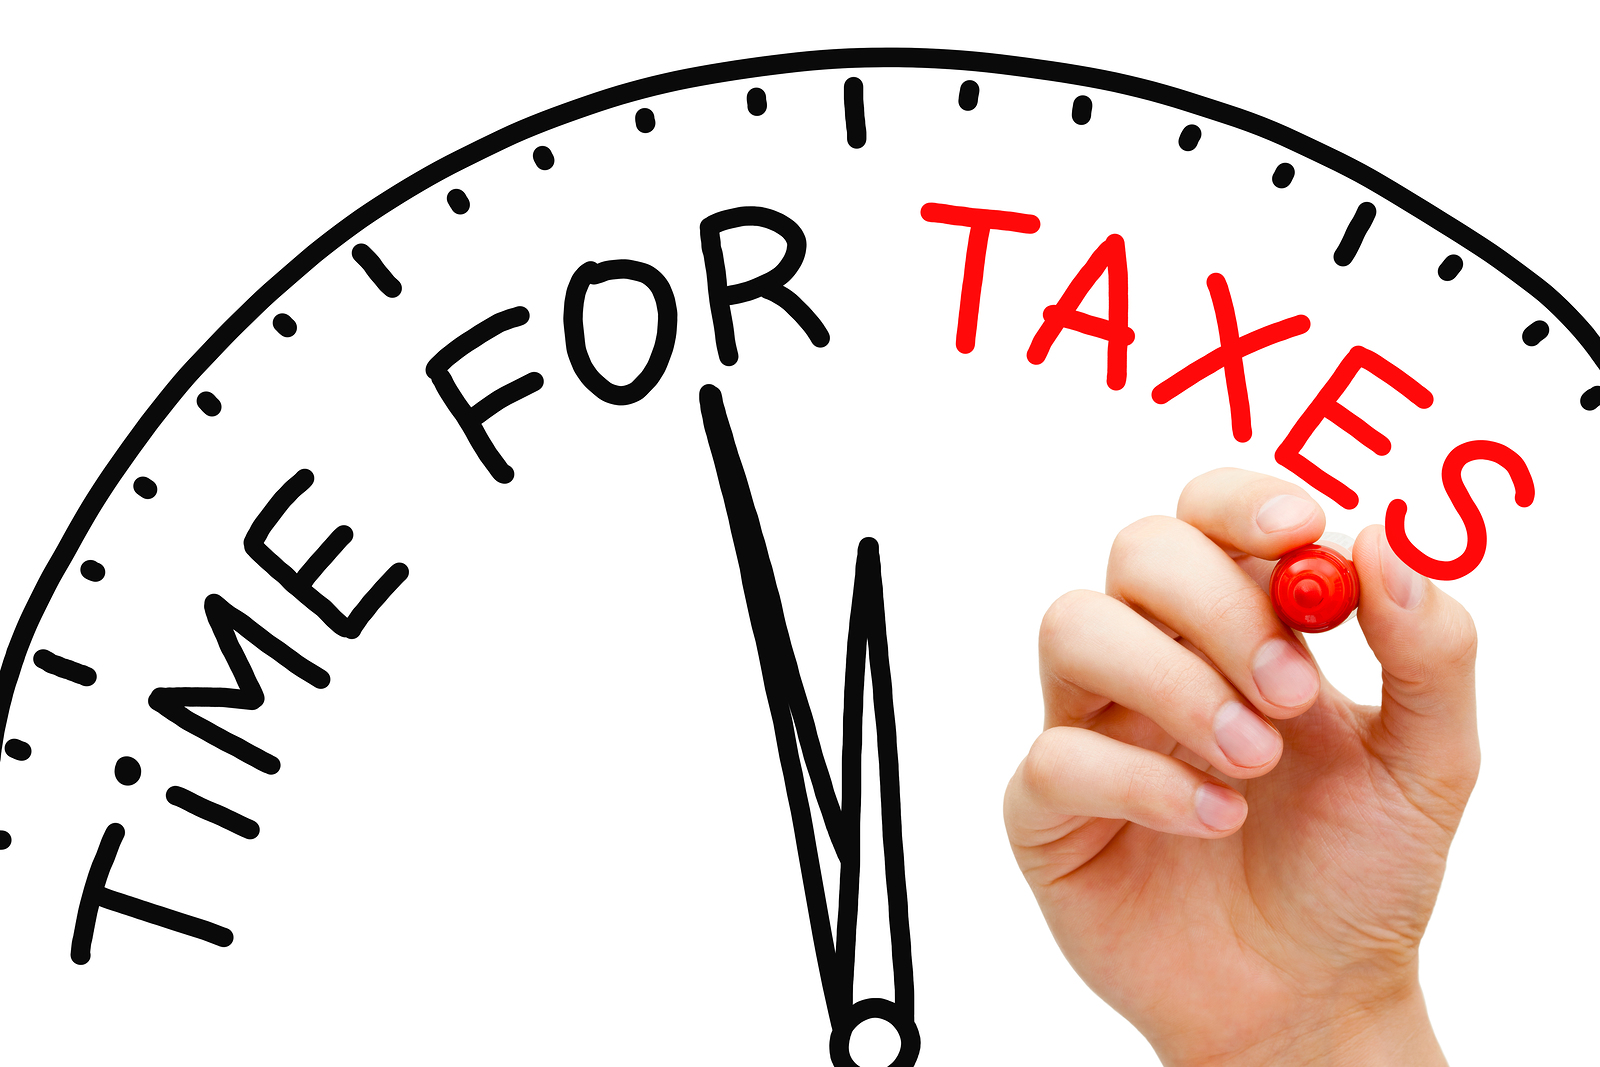 amatullifinancialservices. » Don’t Wait! File Your Taxes Early